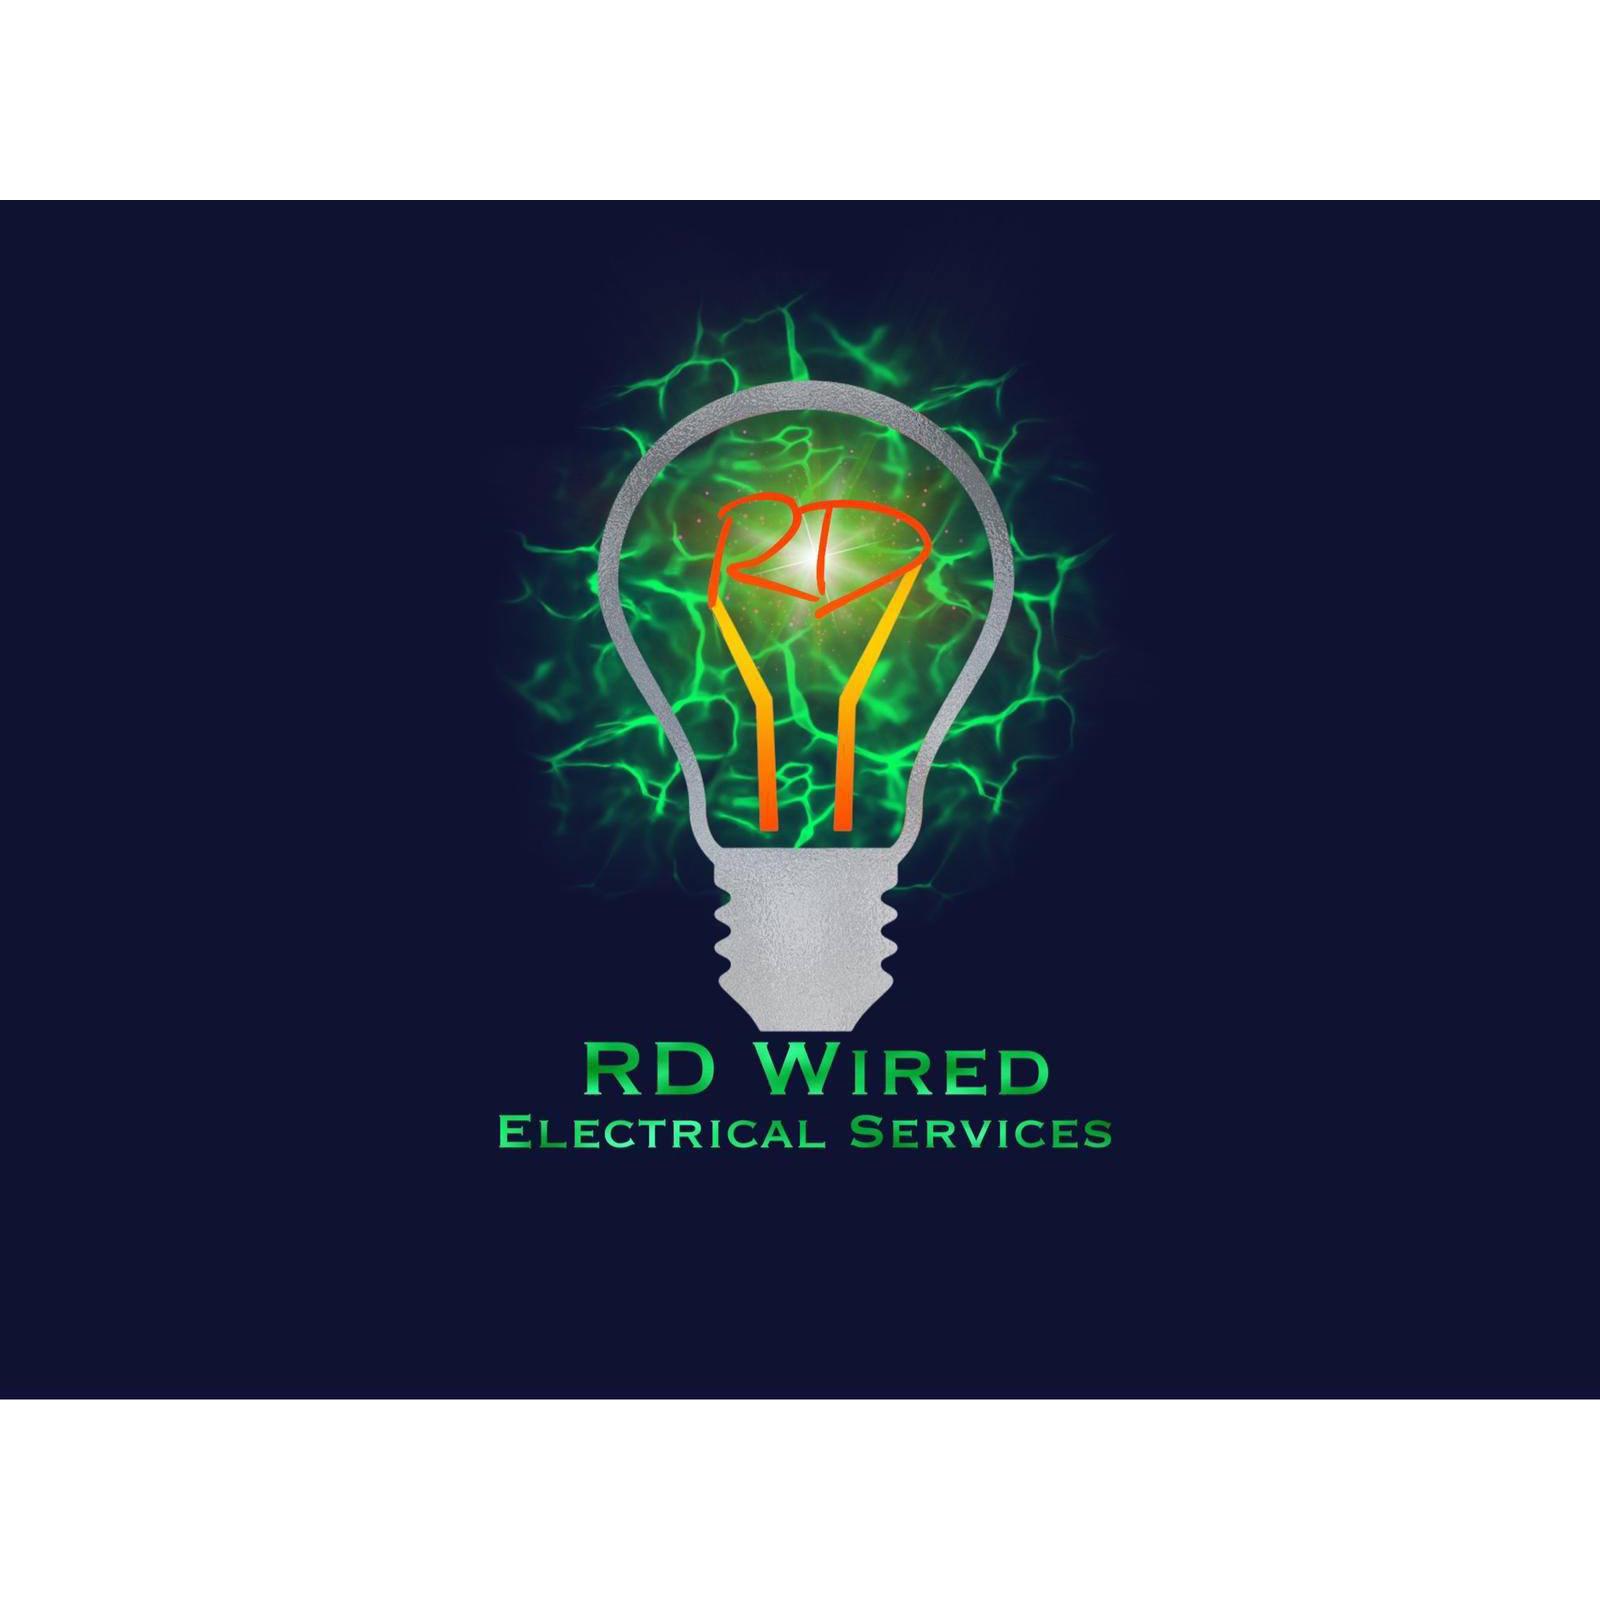 RD Wired Electrical Services Ltd - Billingshurst, West Sussex RH14 9HB - 07810 864850 | ShowMeLocal.com